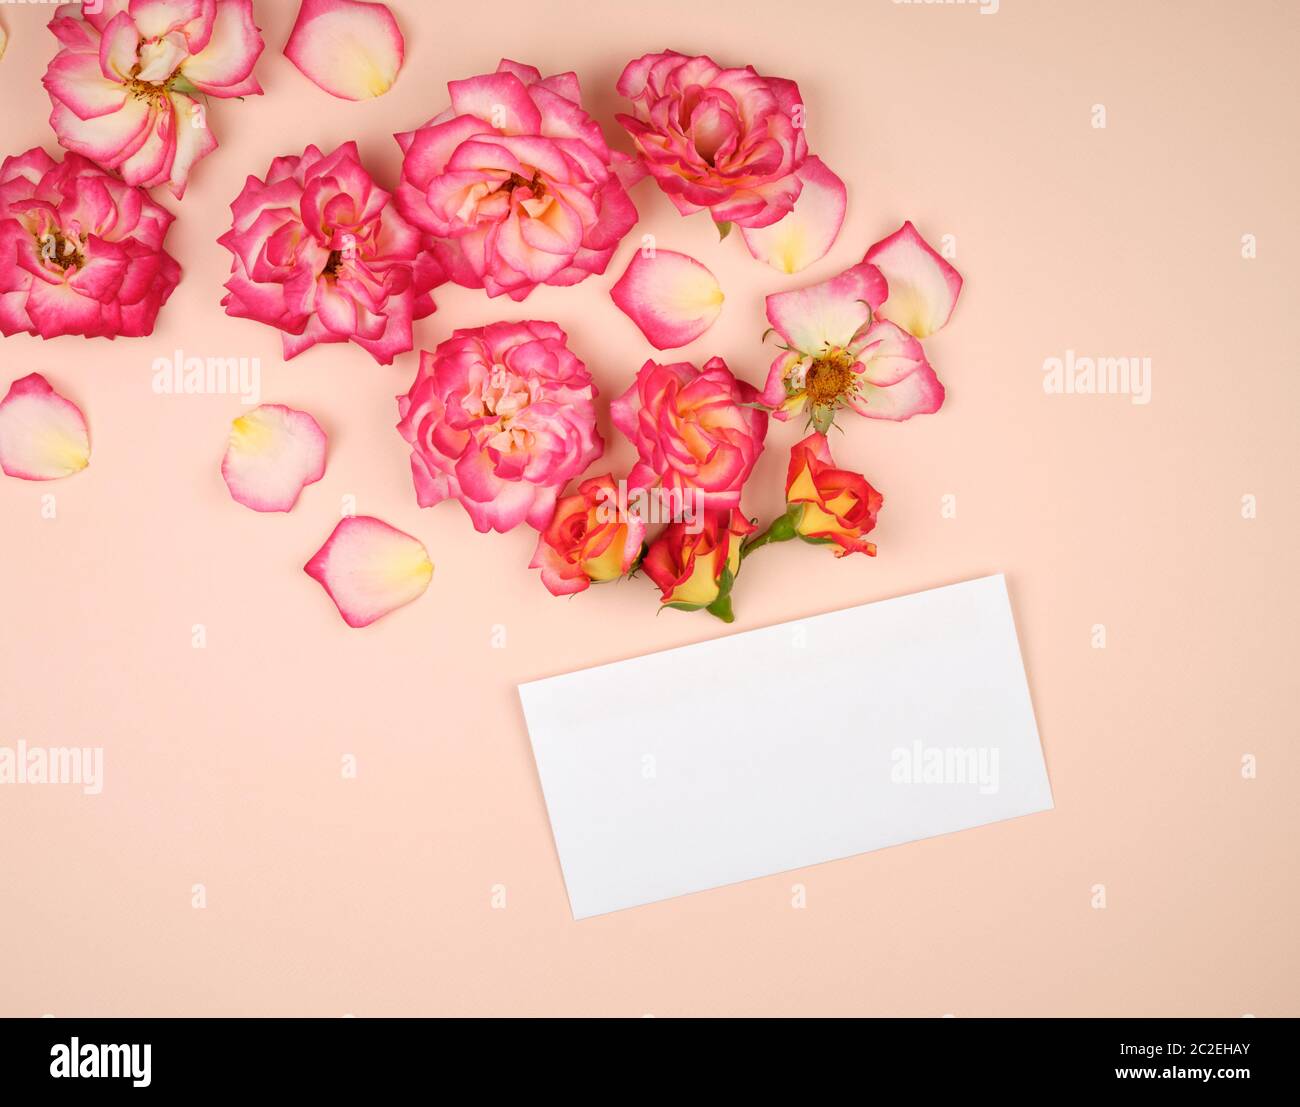 pink rose buds and a white paper envelope on a bieg background, top view, flat lay Stock Photo